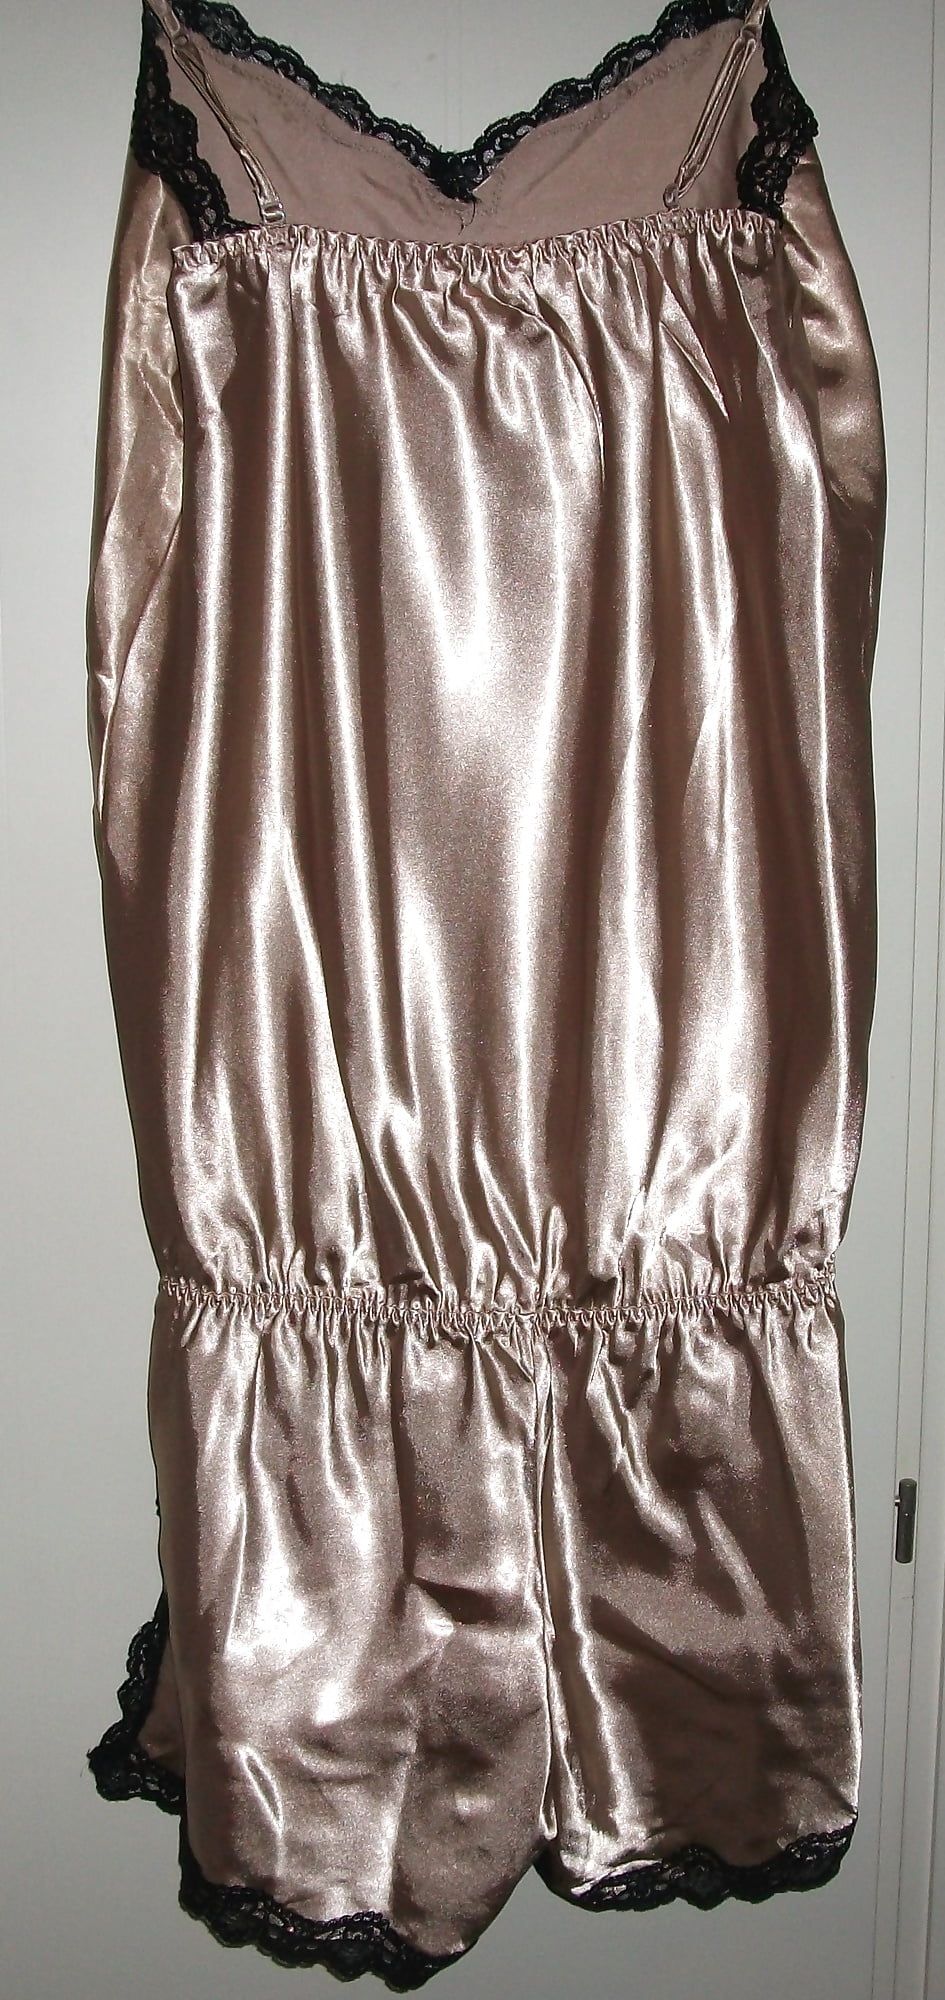 Misc satin. PM me if interested #15